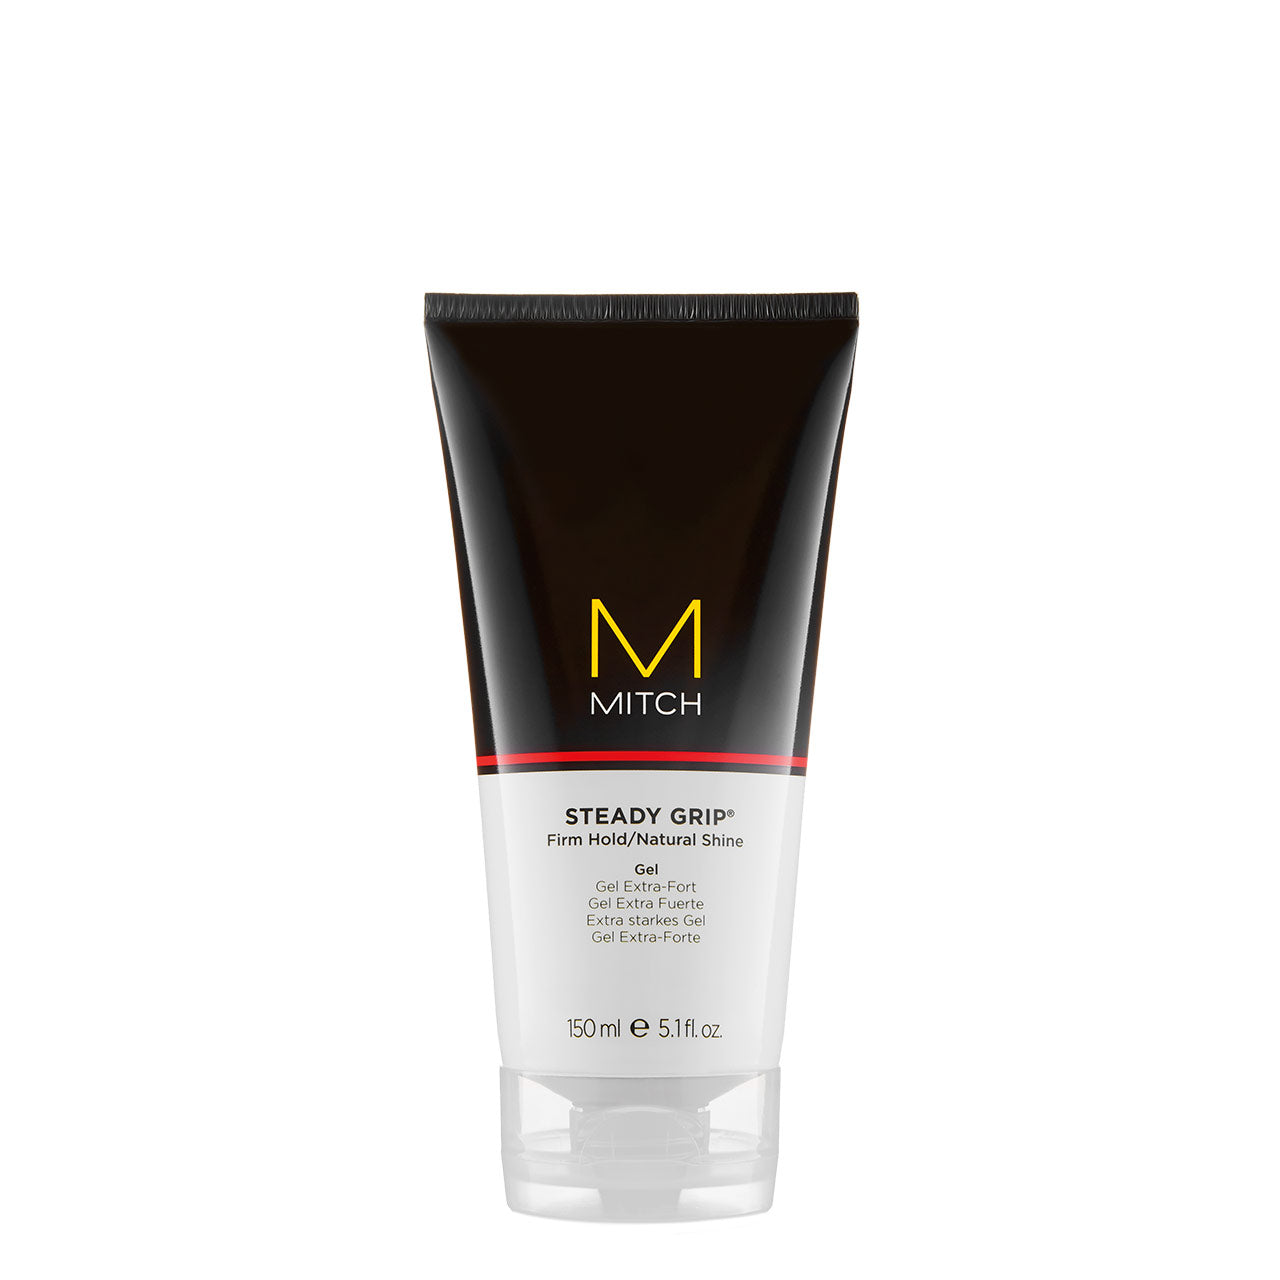 Mitch Grooming Steady Grip Gel - 150ML - by Paul Mitchell |ProCare Outlet|